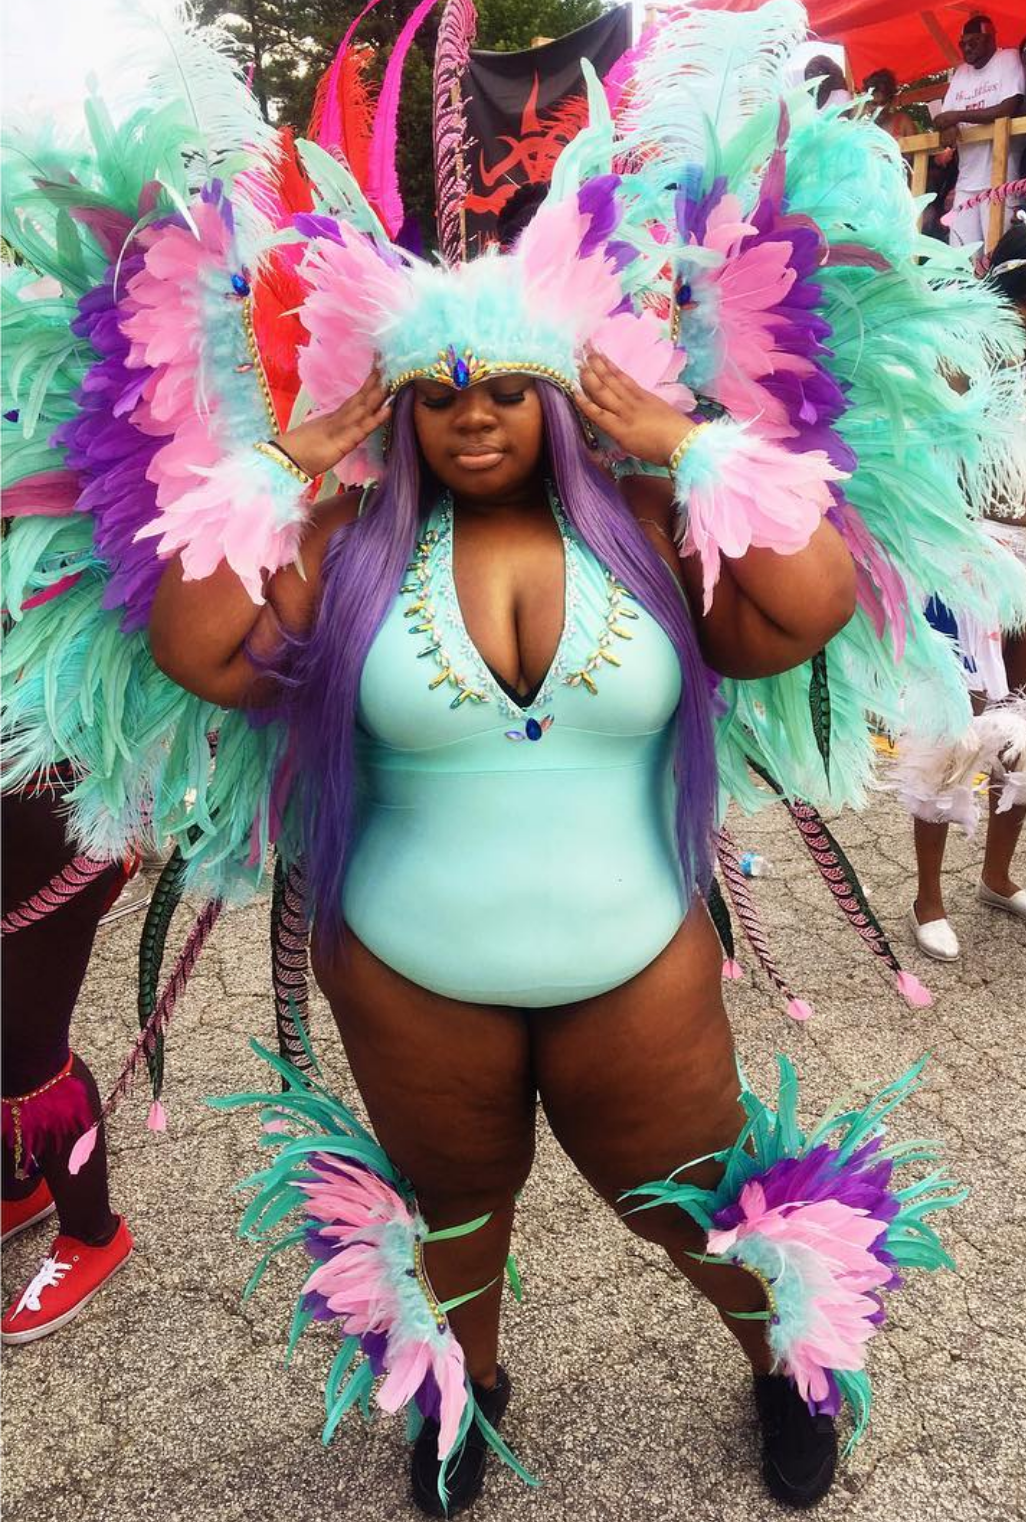 woman showing costume at atl carnival